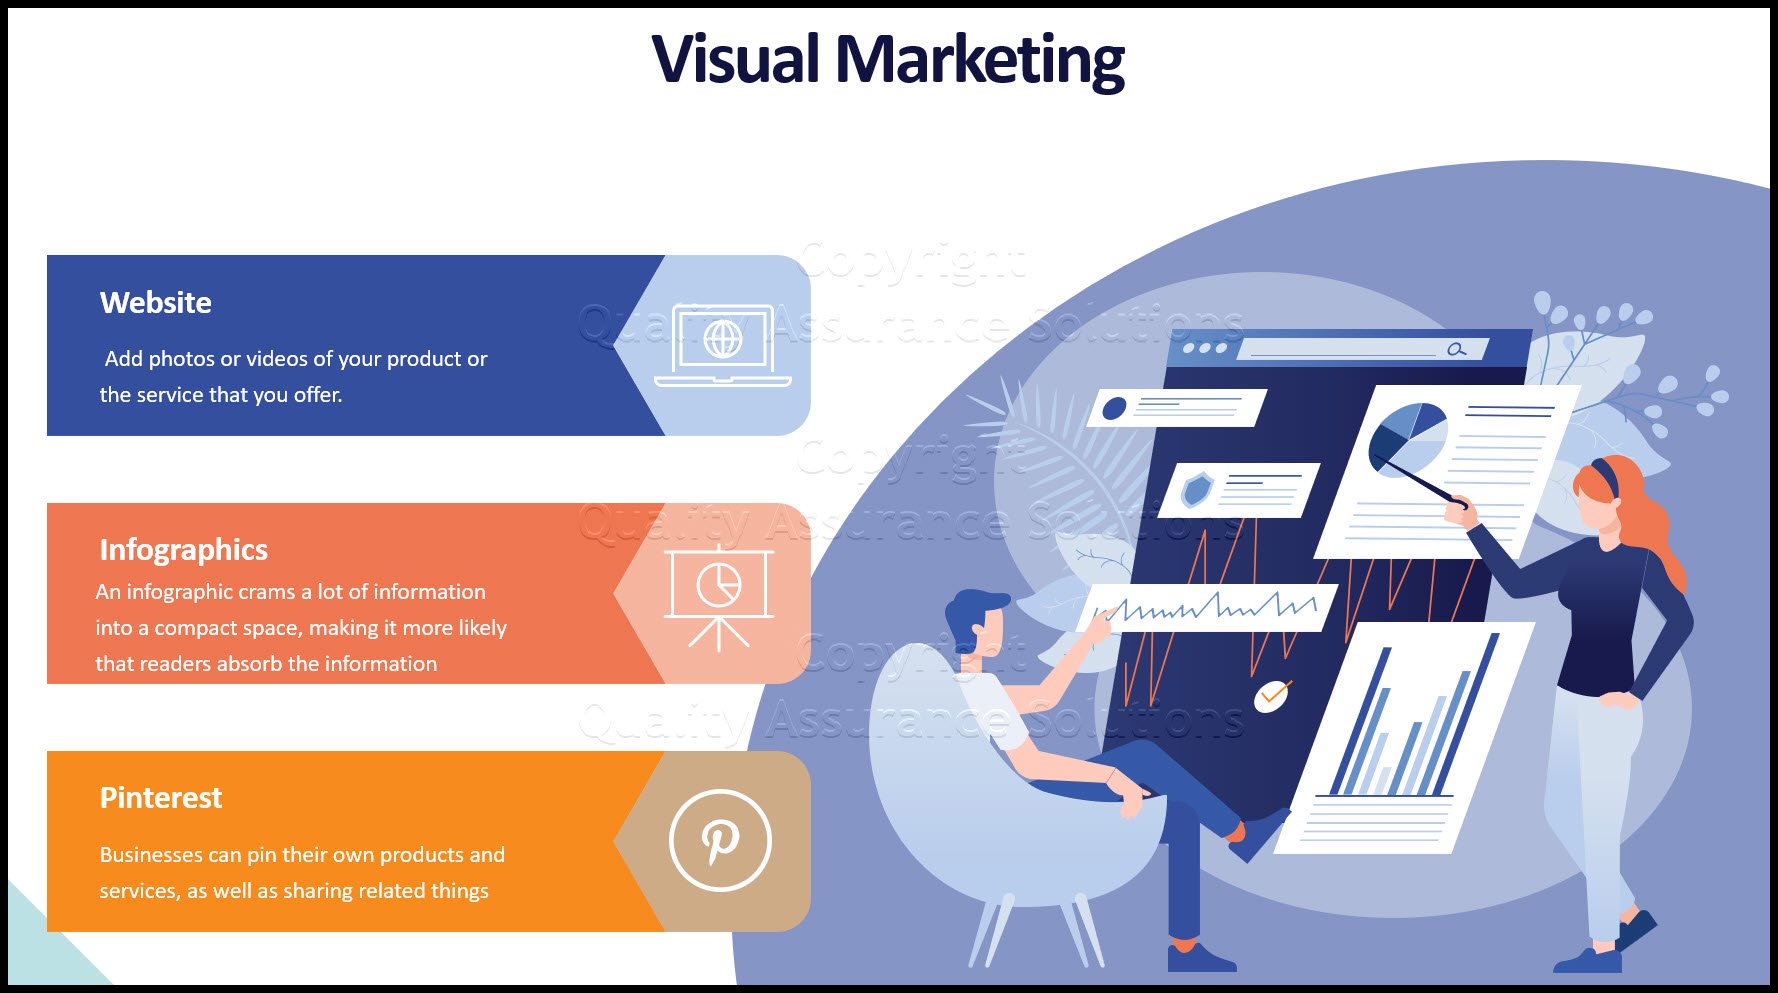 Visual walkthrough techniqes for online marketing. People tend to be drawn to things that are visually stimulating. The internet is no exception.